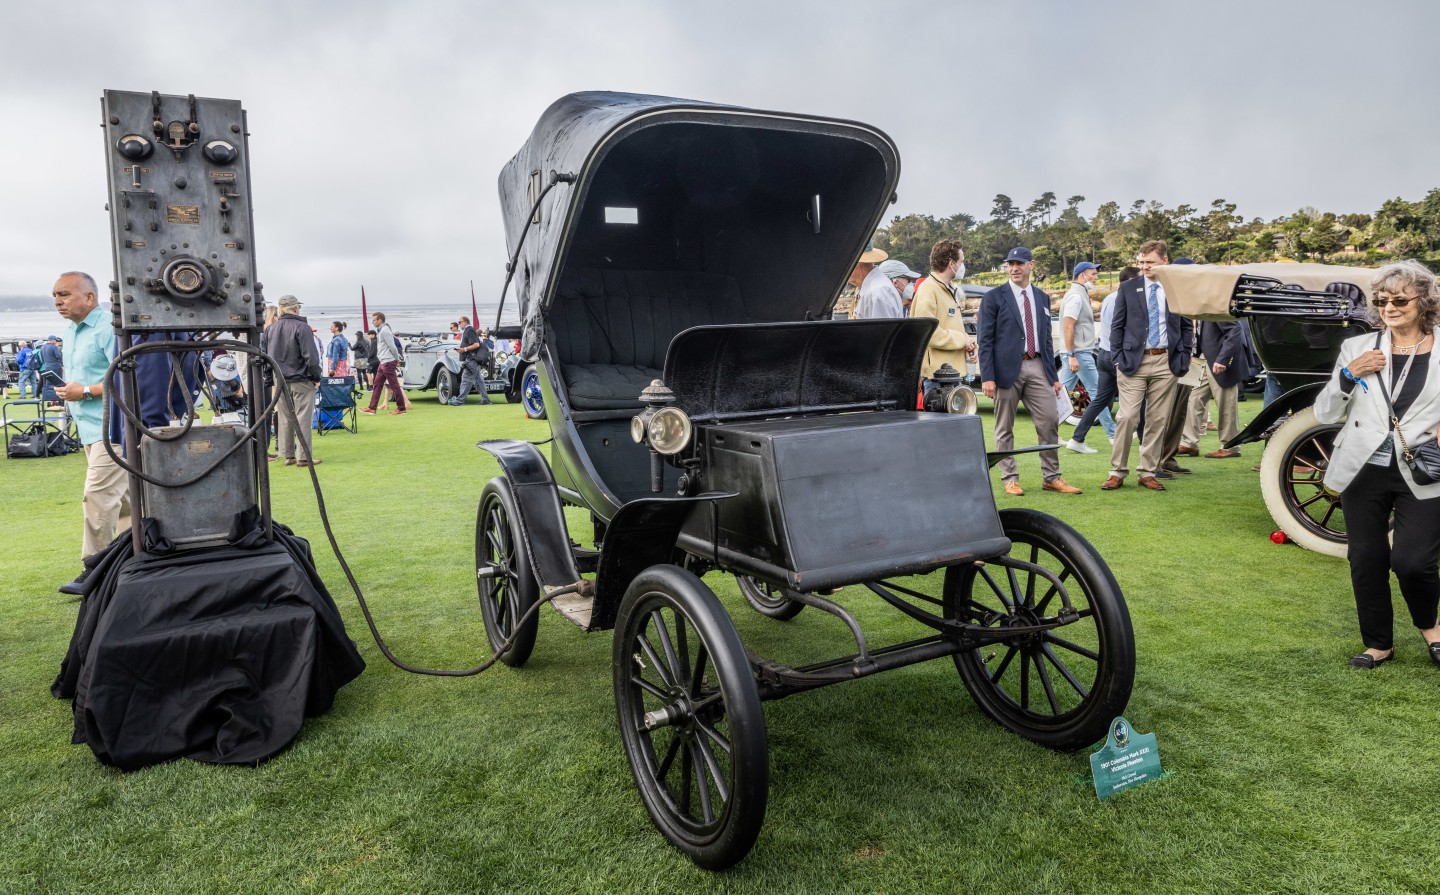 At left is the home charger and at right is the electric car it charged: a 1901 Columbia Mark XXXI Victoria Phaeton. The car is owned by Nick Grewal of Sanbornton, New Hampshire